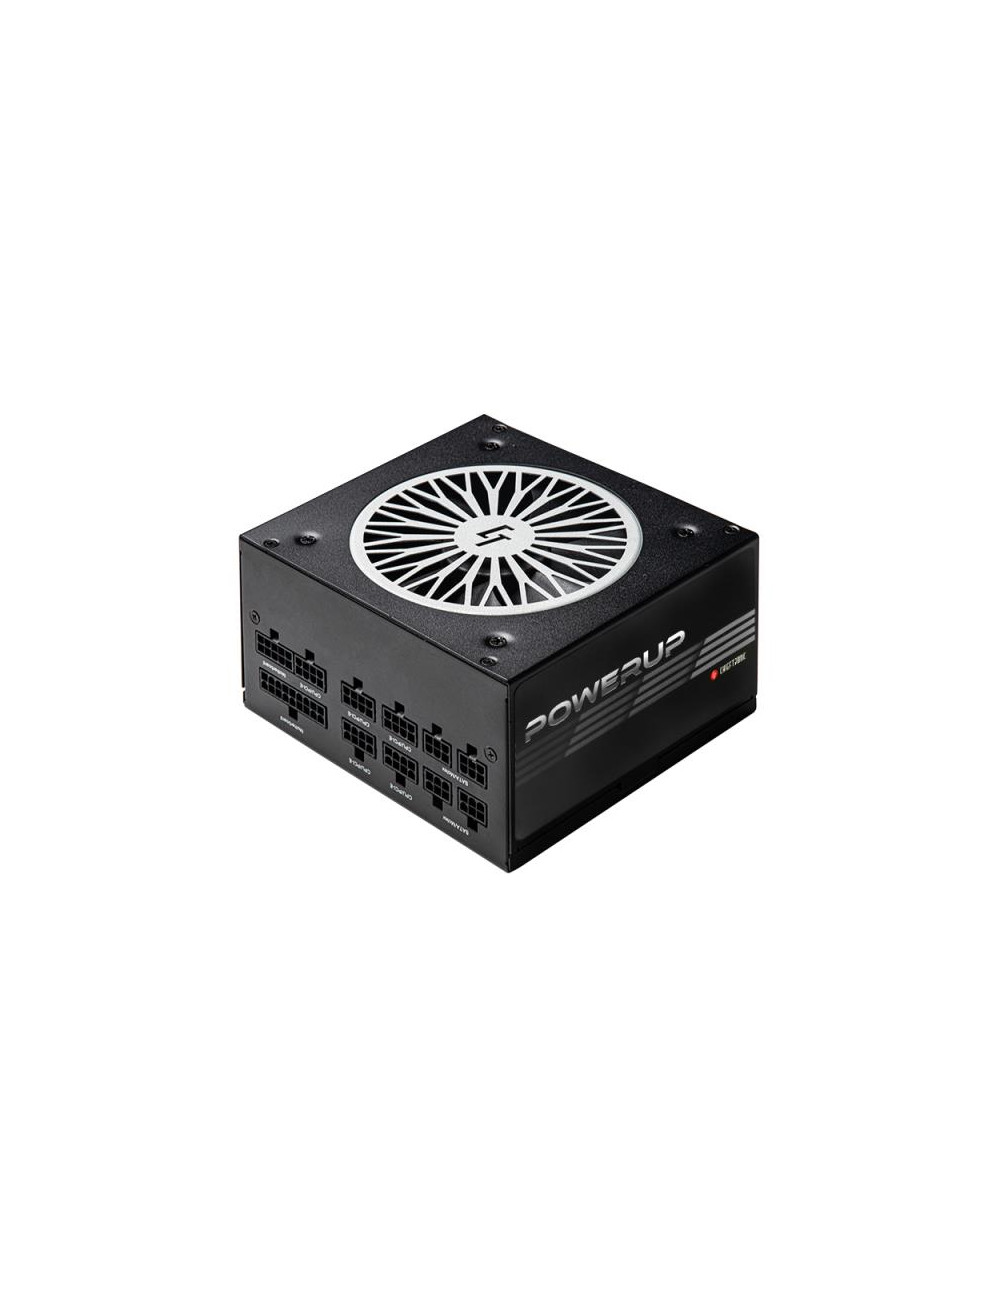 Power Supply|CHIEFTEC|750 Watts|Efficiency 80 PLUS GOLD|PFC Active|GPX-750FC